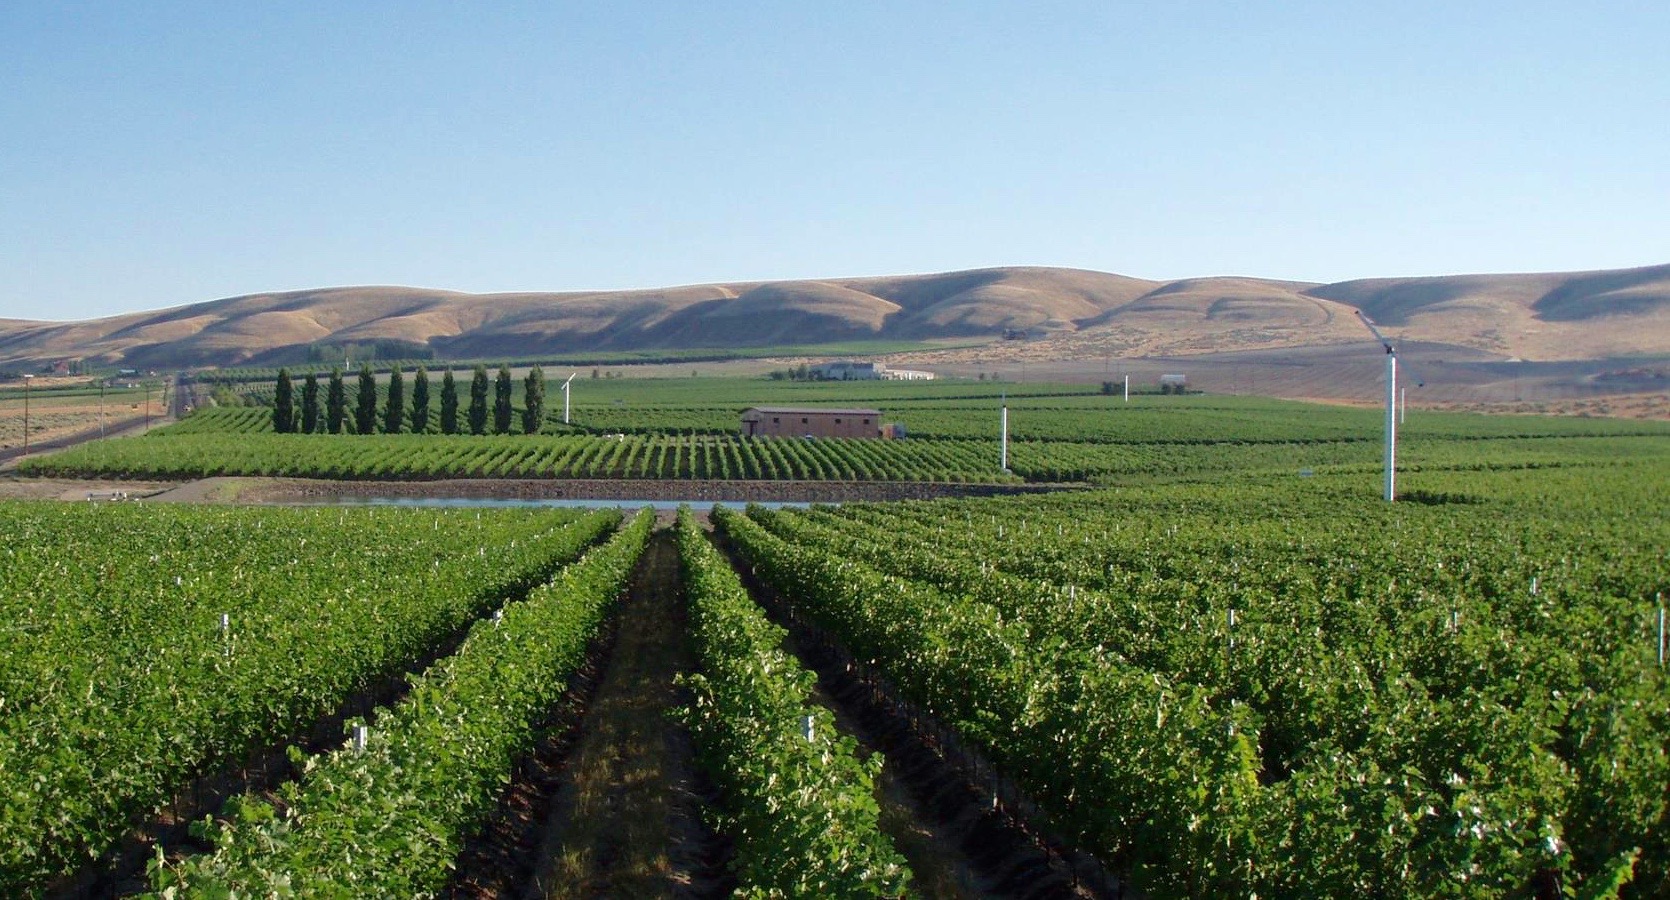 The Quilceda Creek vineyards - Champoux, Golitzine and Palengat - are located in Washington’s great agricultural region between the Yakima and Walla Walla Valleys. Photo courtesy of Quilceda Creek Vintners.